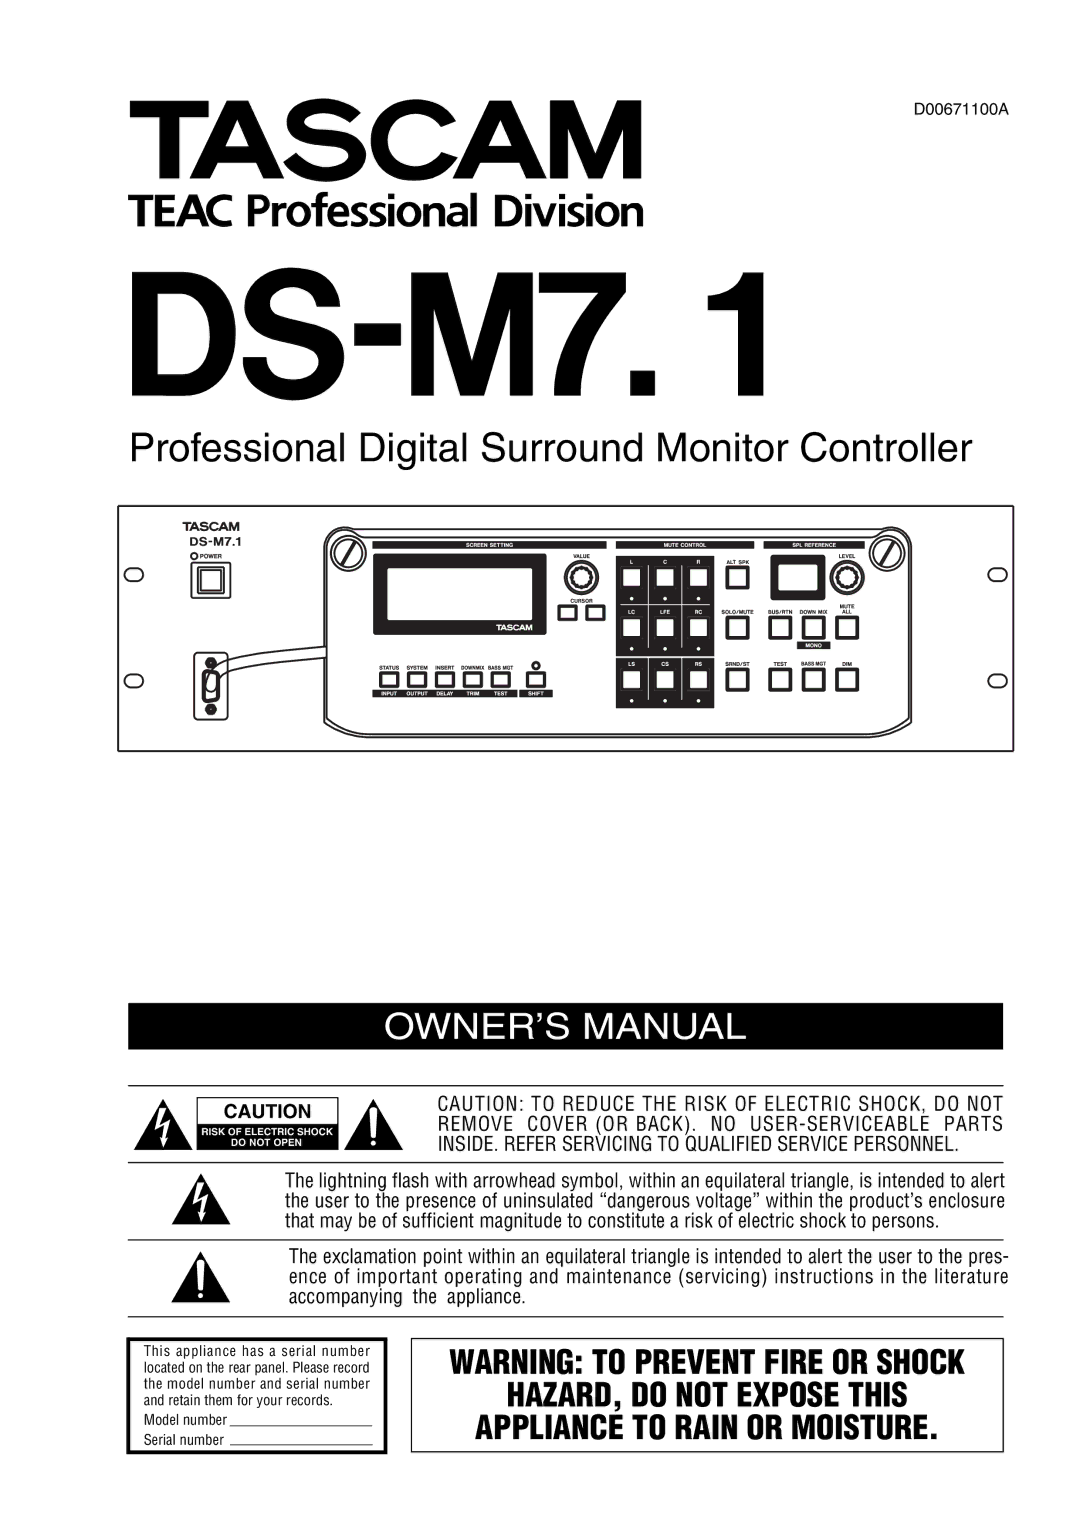 Tascam DS-M7.1 owner manual Professional Digital Surround Monitor Controller 